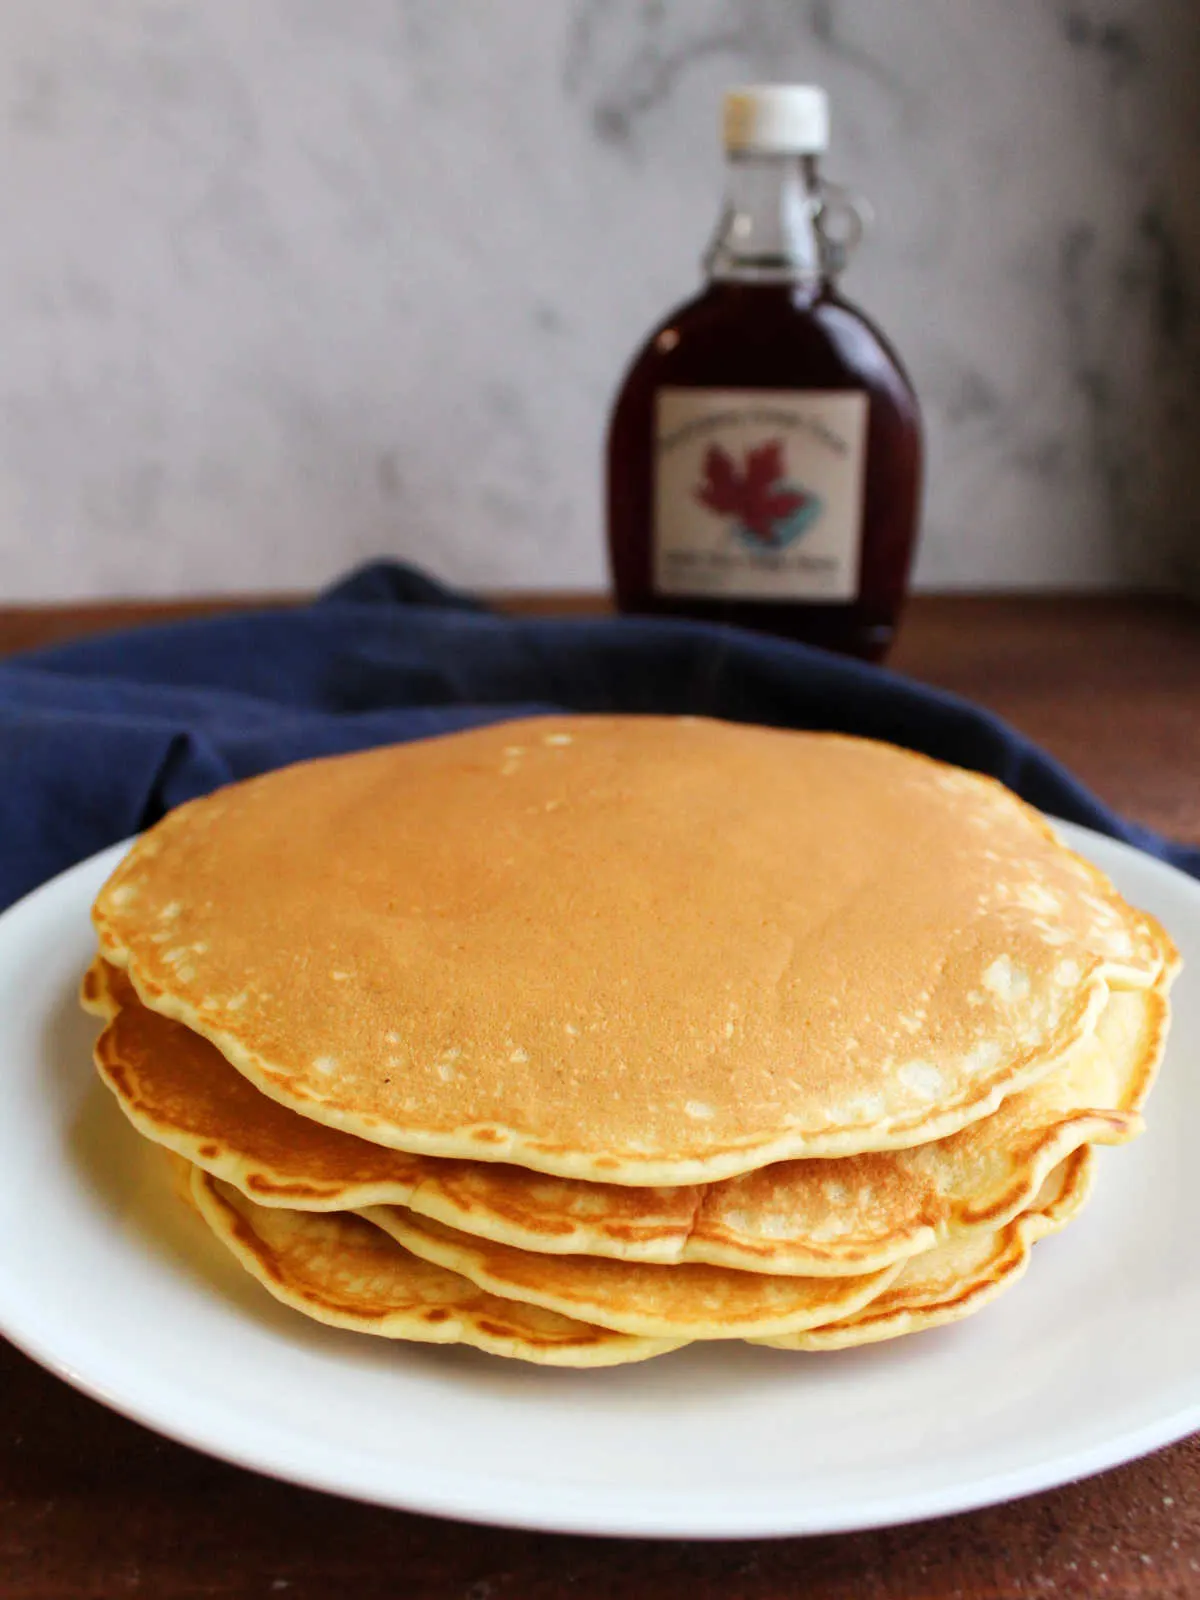 Stack of golden brown pancakes on plate in front of bottle of pure maple syrup.